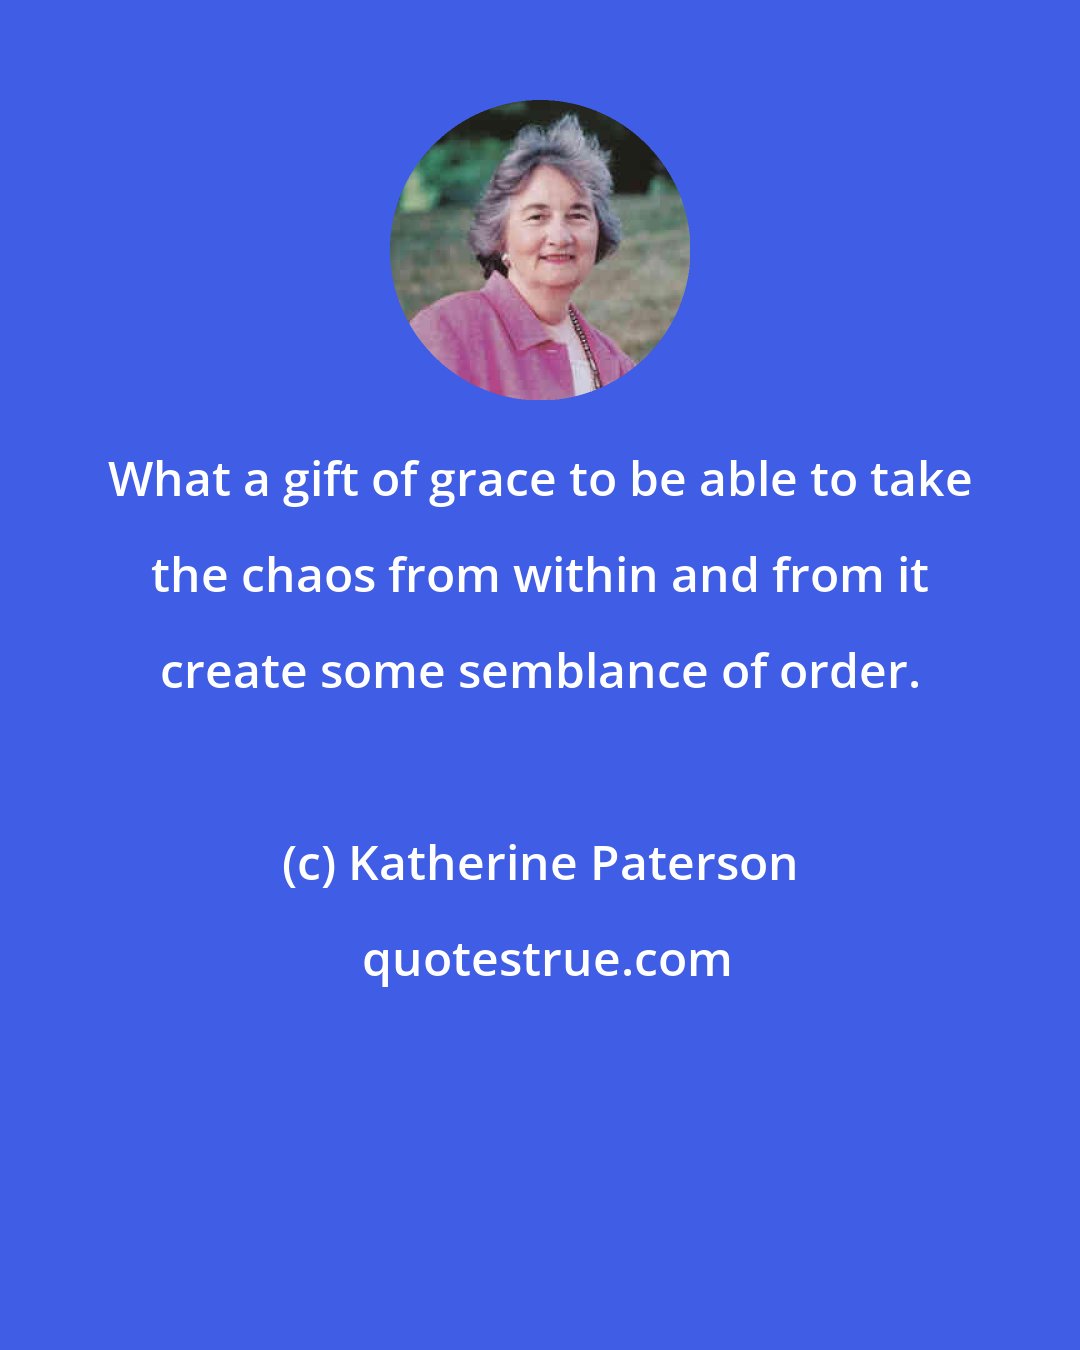 Katherine Paterson: What a gift of grace to be able to take the chaos from within and from it create some semblance of order.